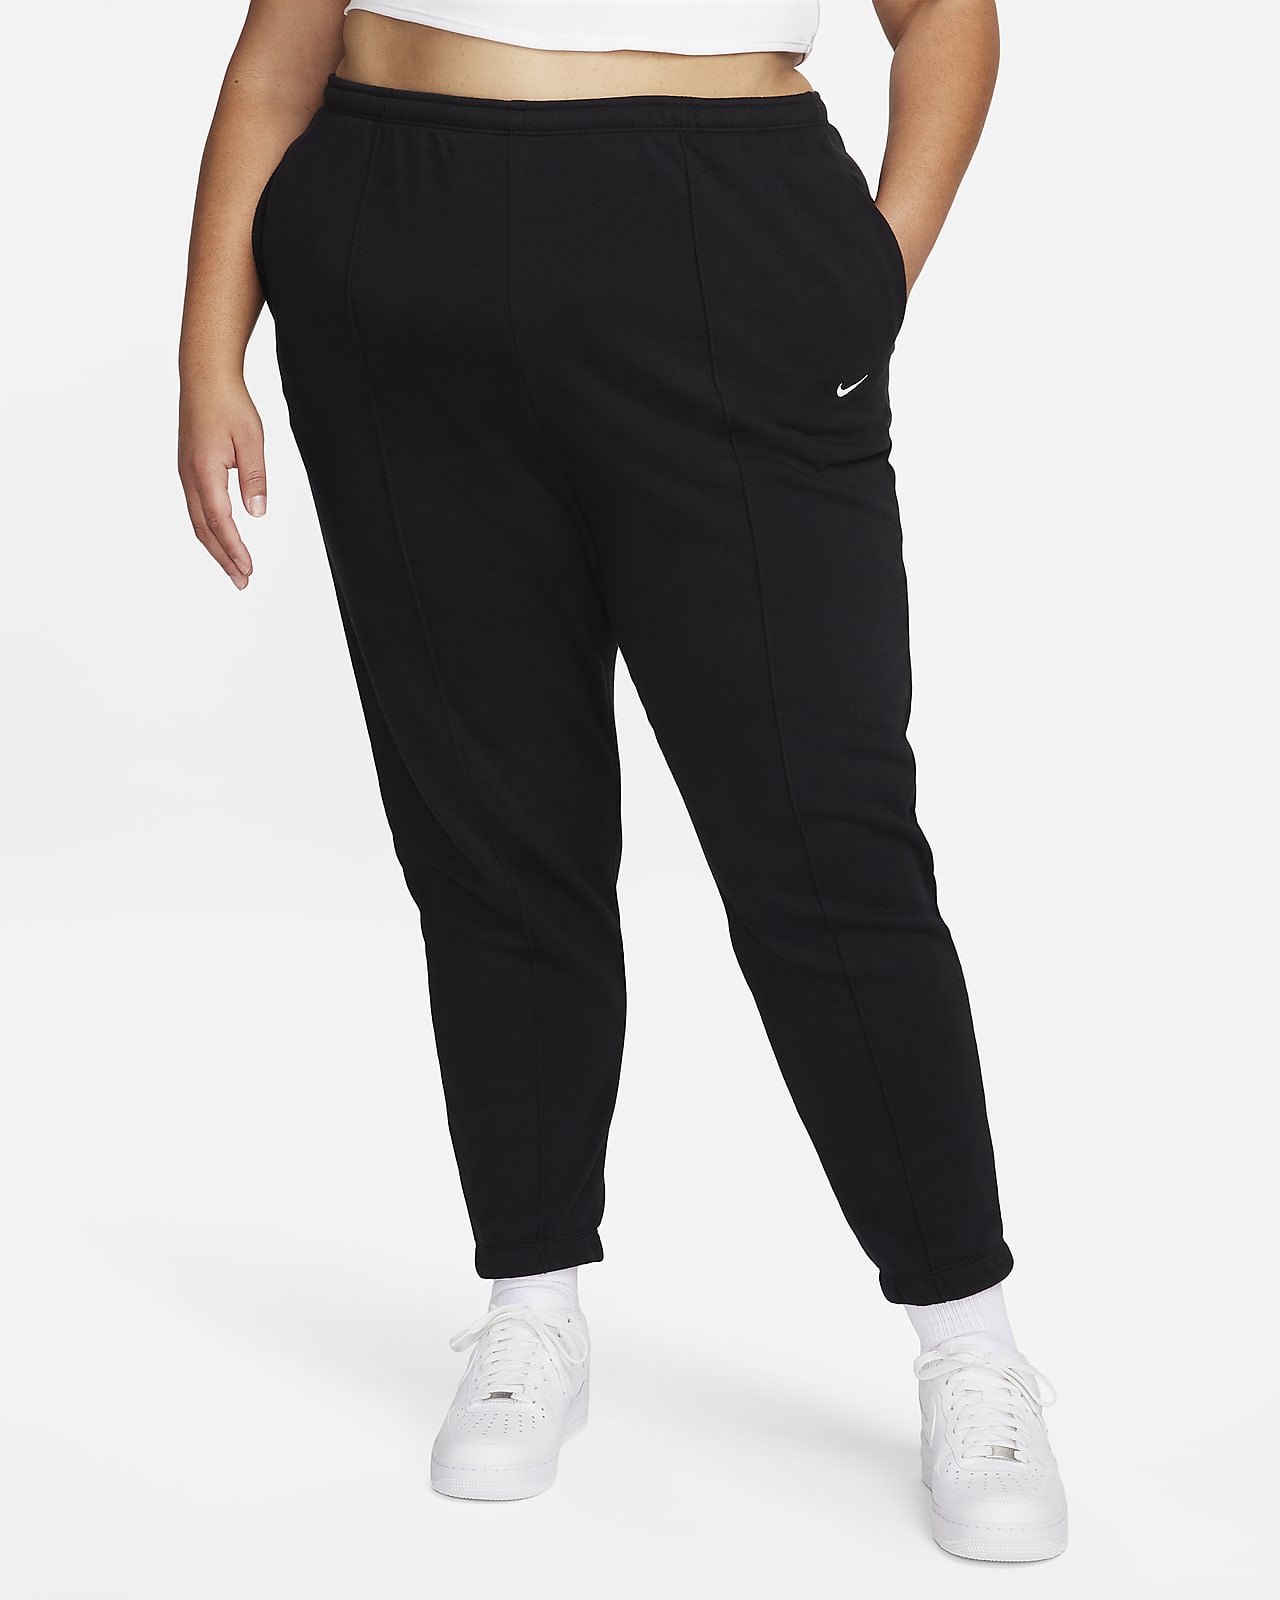 Nike Sportswear Chill Terry Women's Slim High-Waisted French Terry Sweatpants (Plus Size)